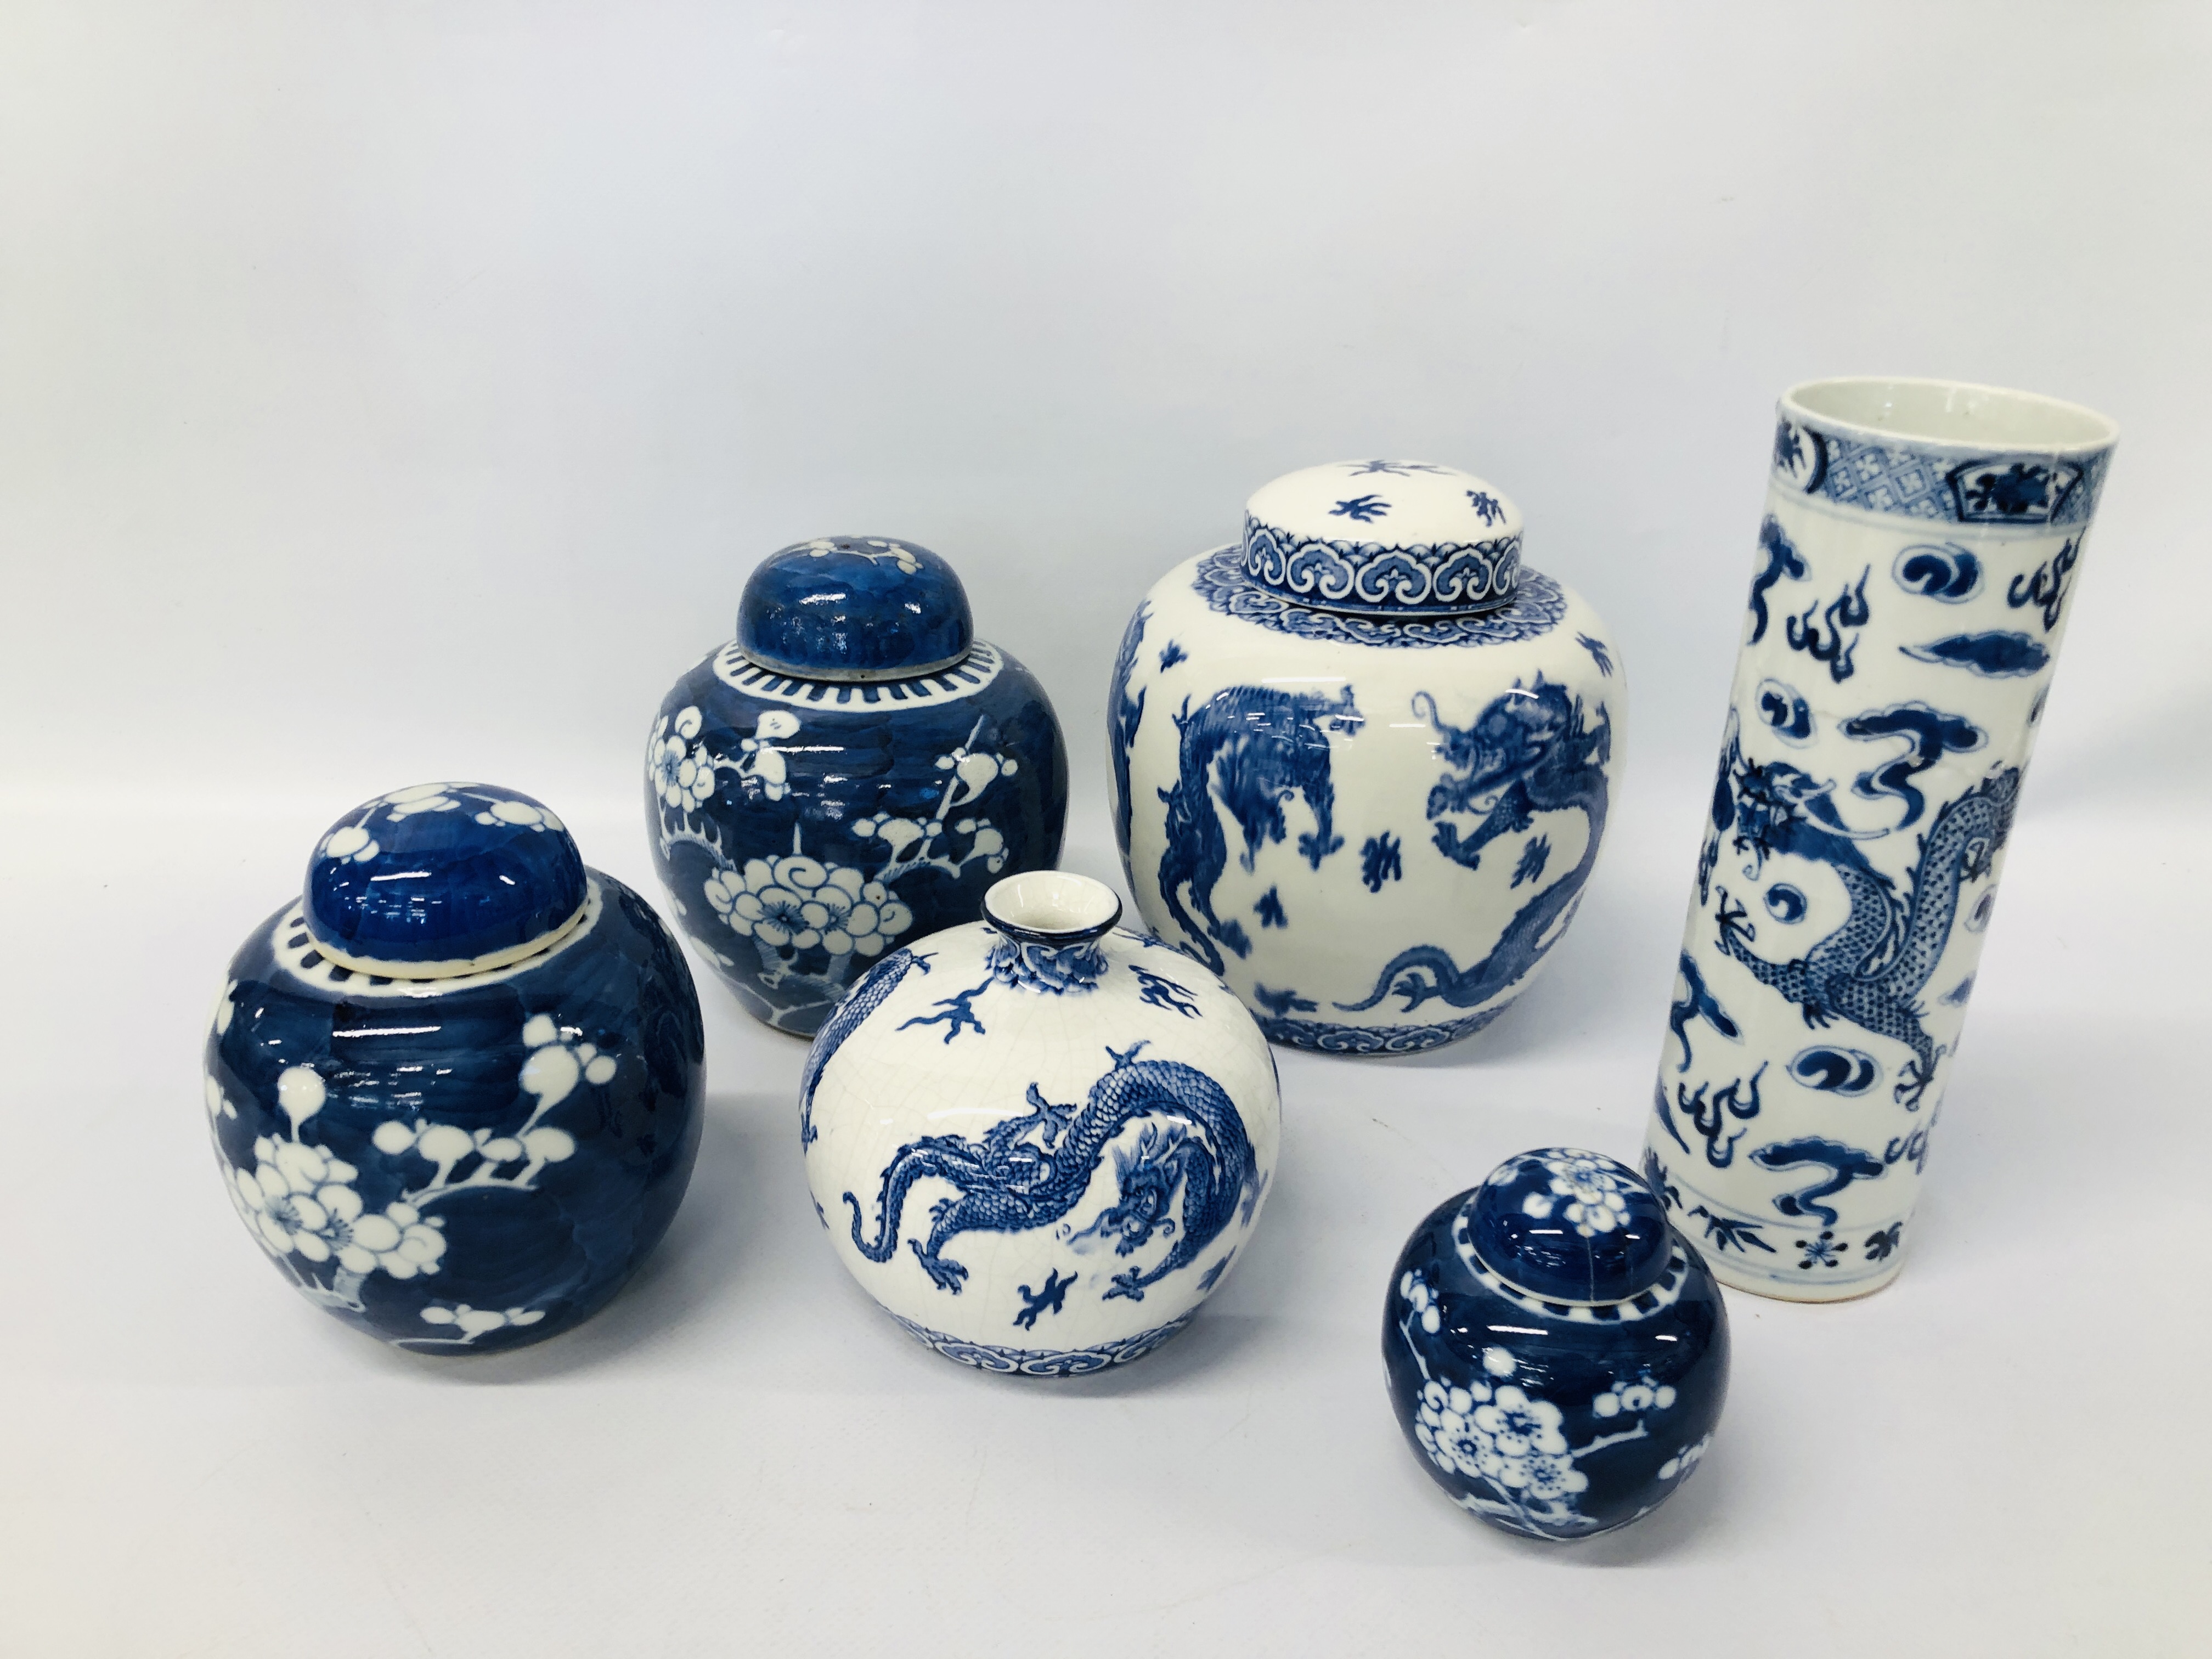 COLLECTION OF ORIENTAL BLUE & WHITE CHINA TO INCLUDE 3 GINGER JARS & COVERS,